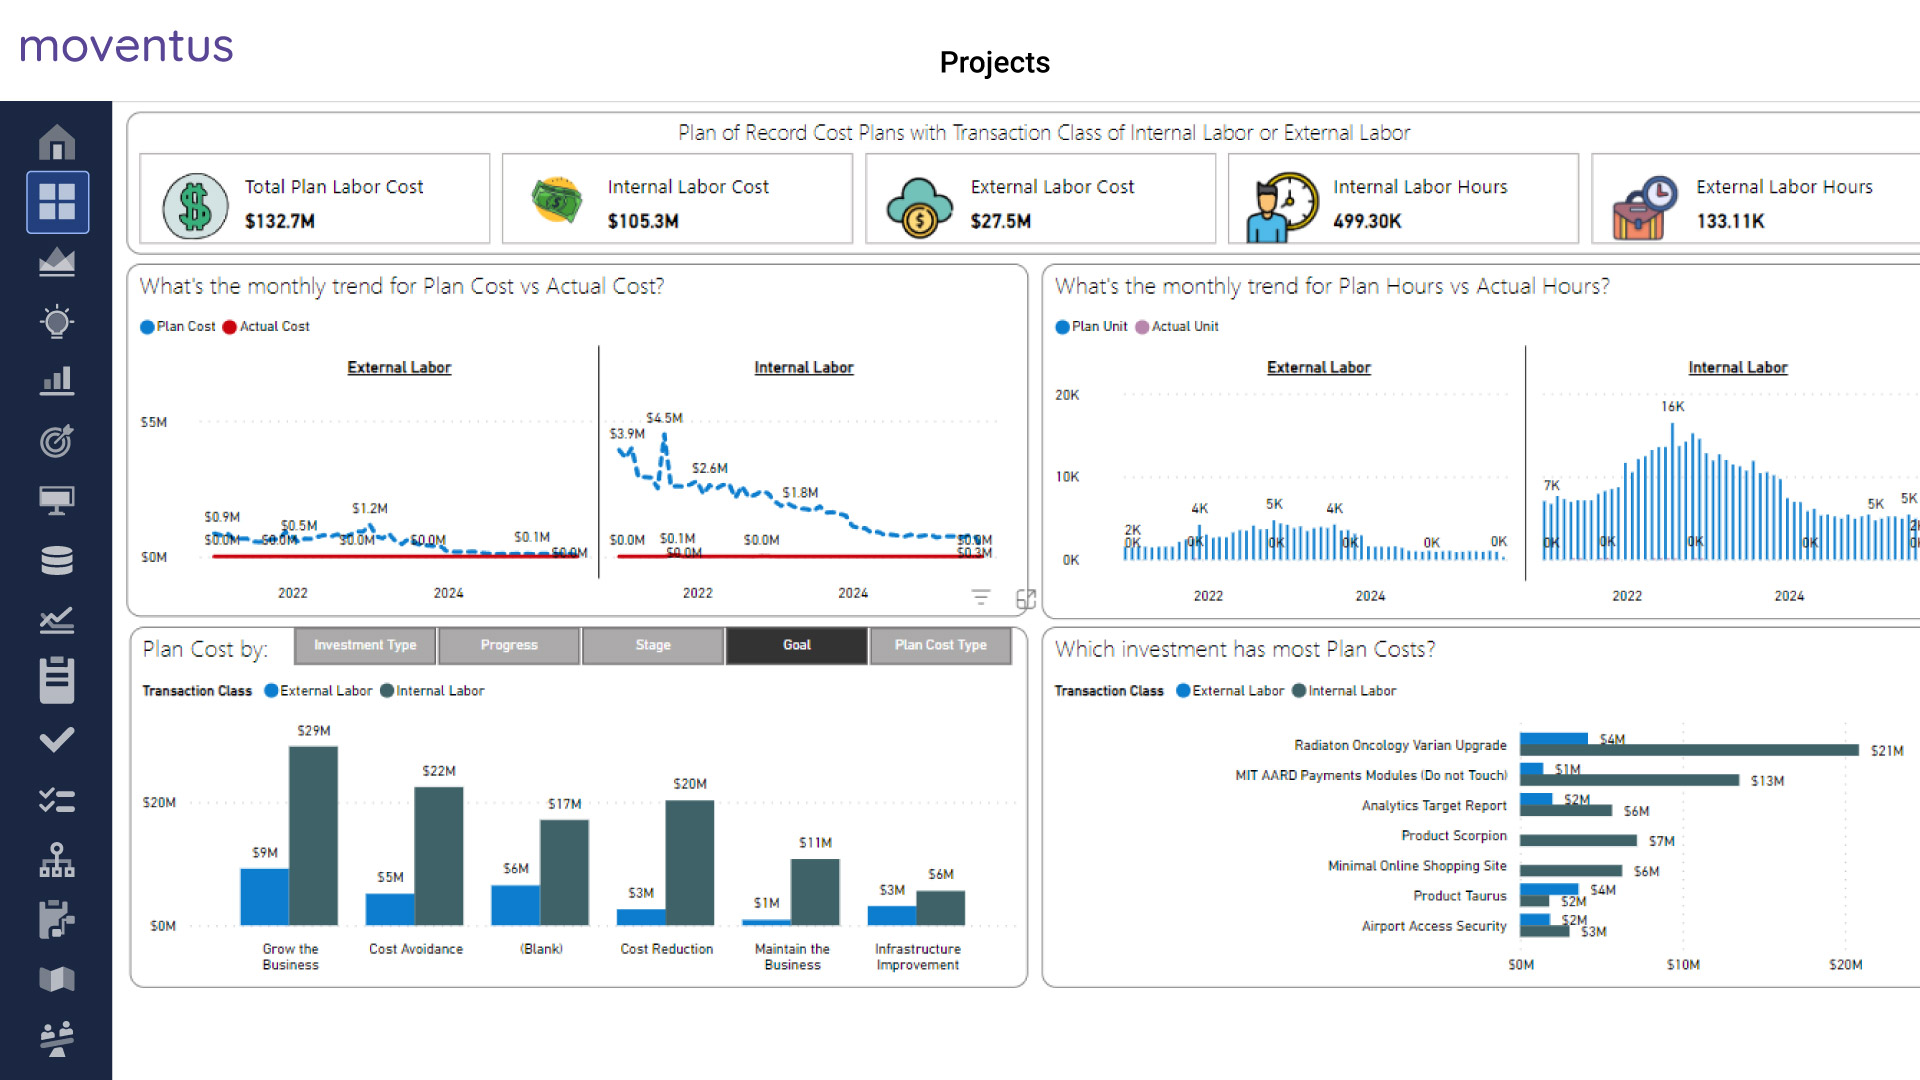 Align projects and costs in one place - Financial Planning Software for Projects